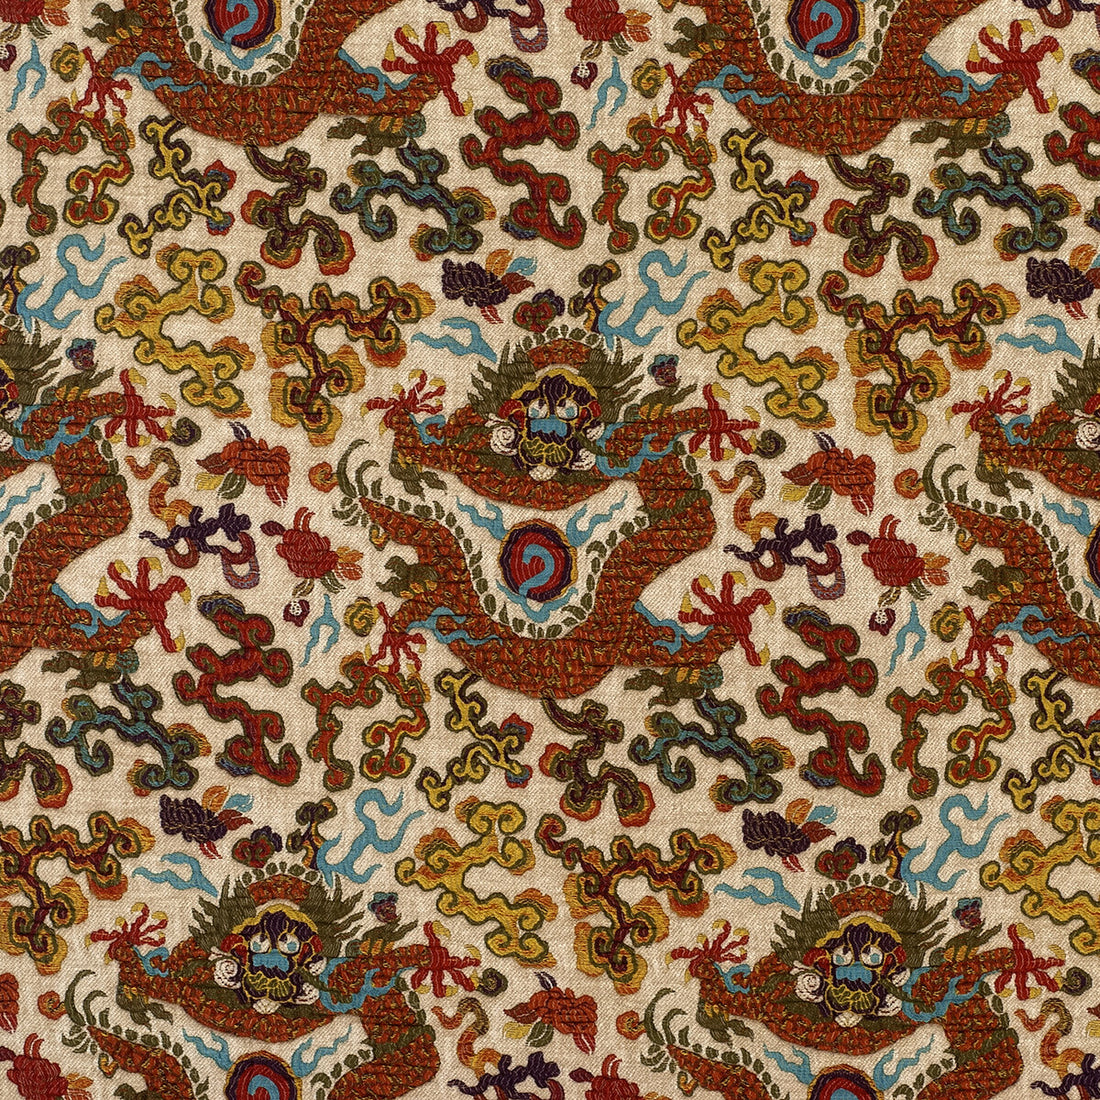 Kravet Couture fabric in 33820-312 color - pattern 33820.312.0 - by Kravet Couture